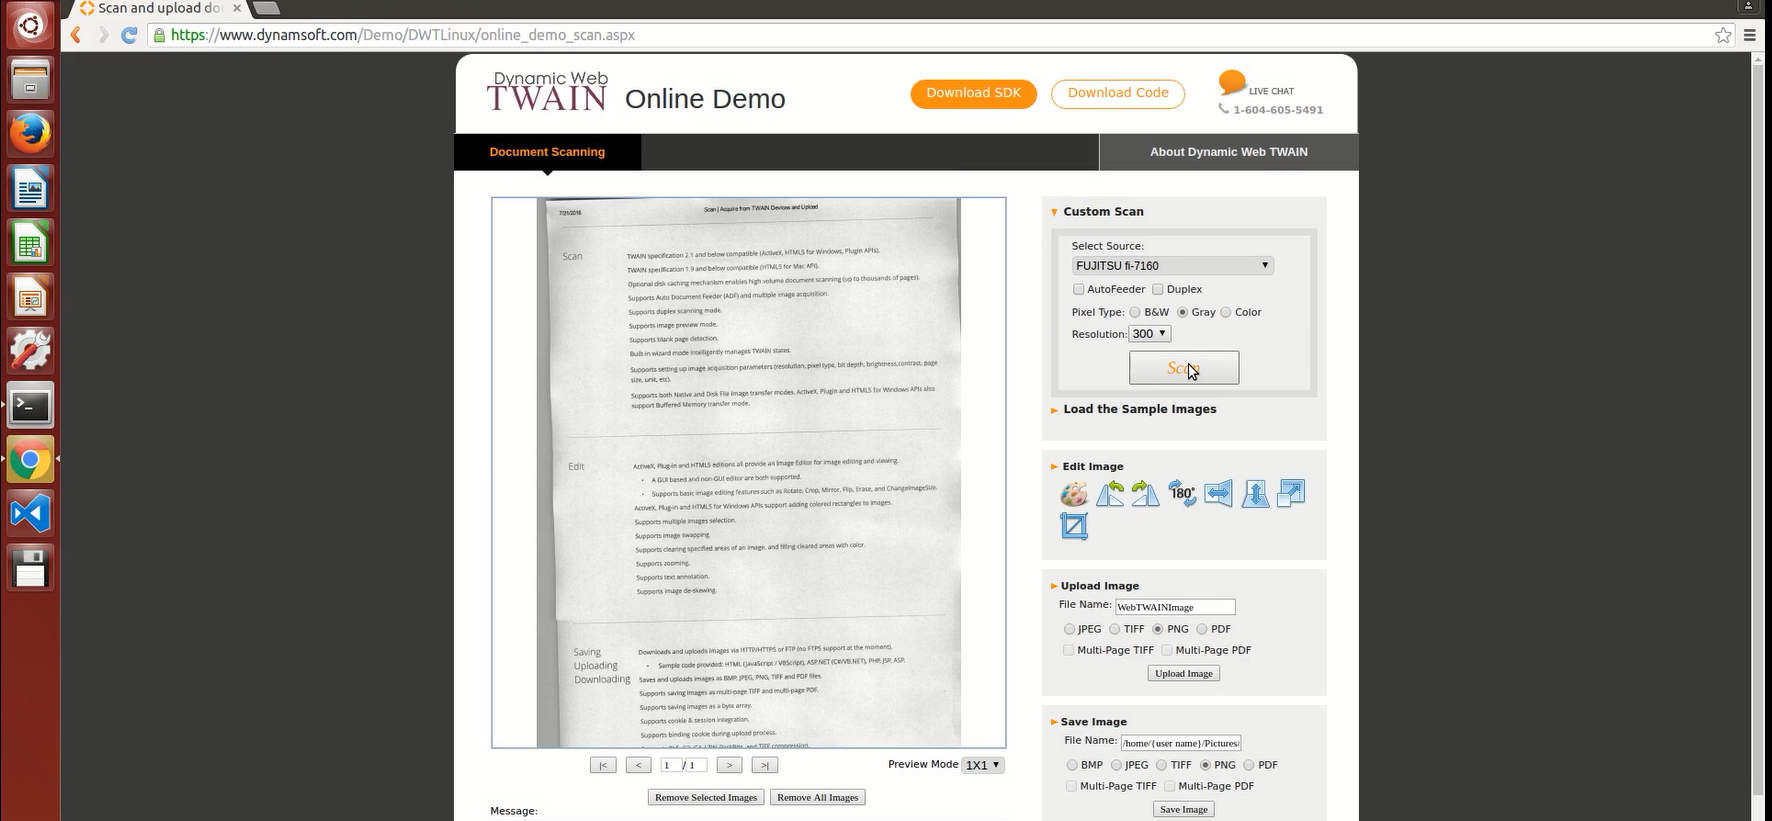 Scan documents from Chrome on Ubuntu from the online demo of Dynamic Web TWAIN Linux Edition